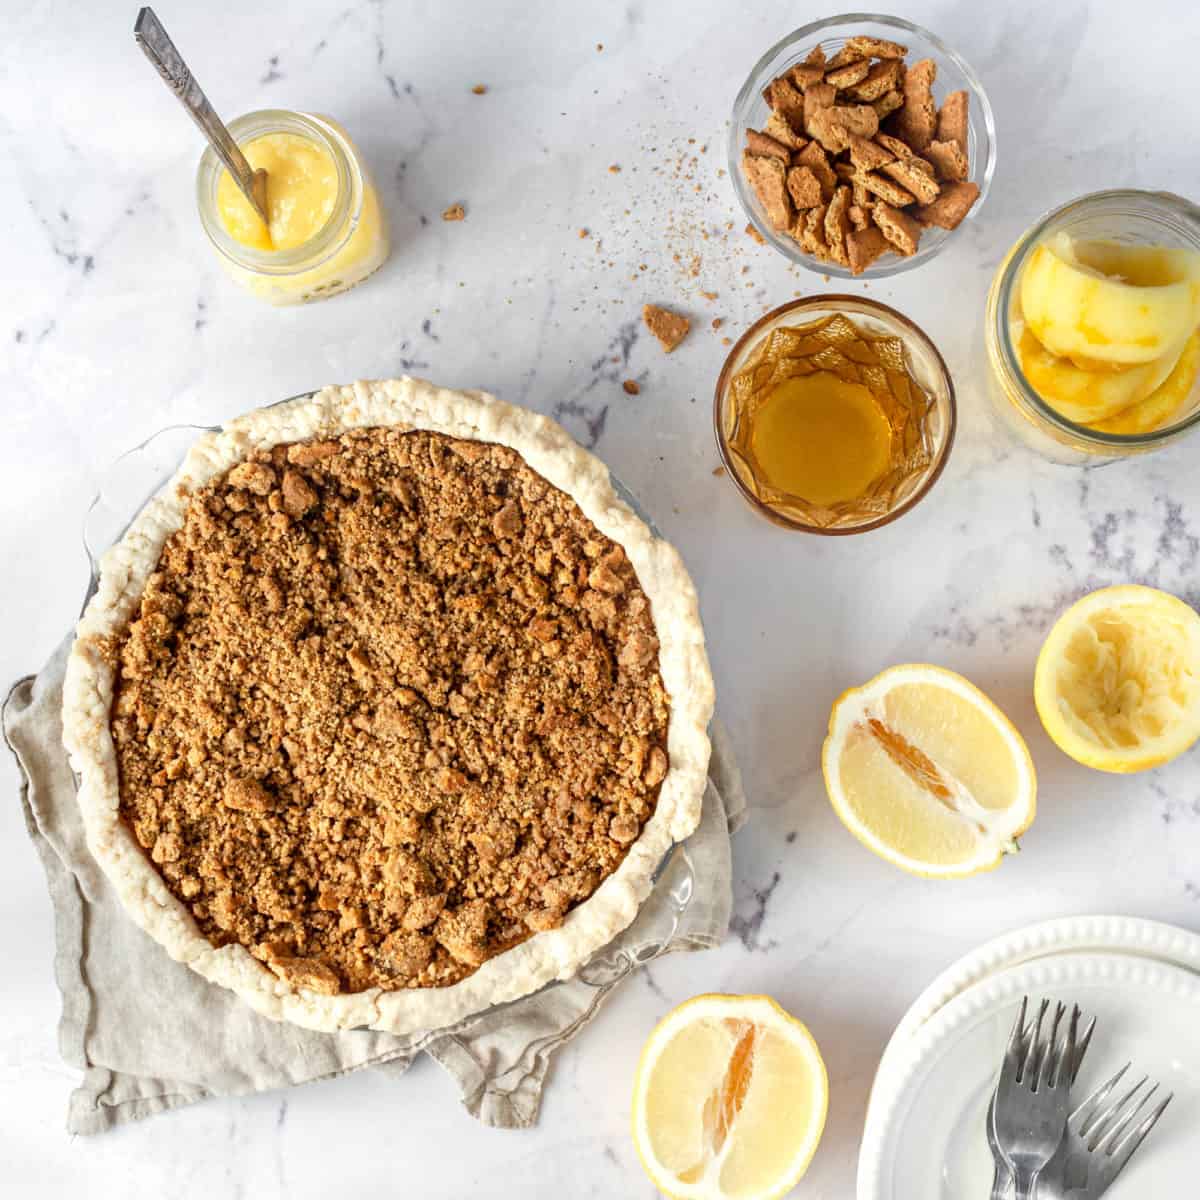 A completed lemon crunch pie.